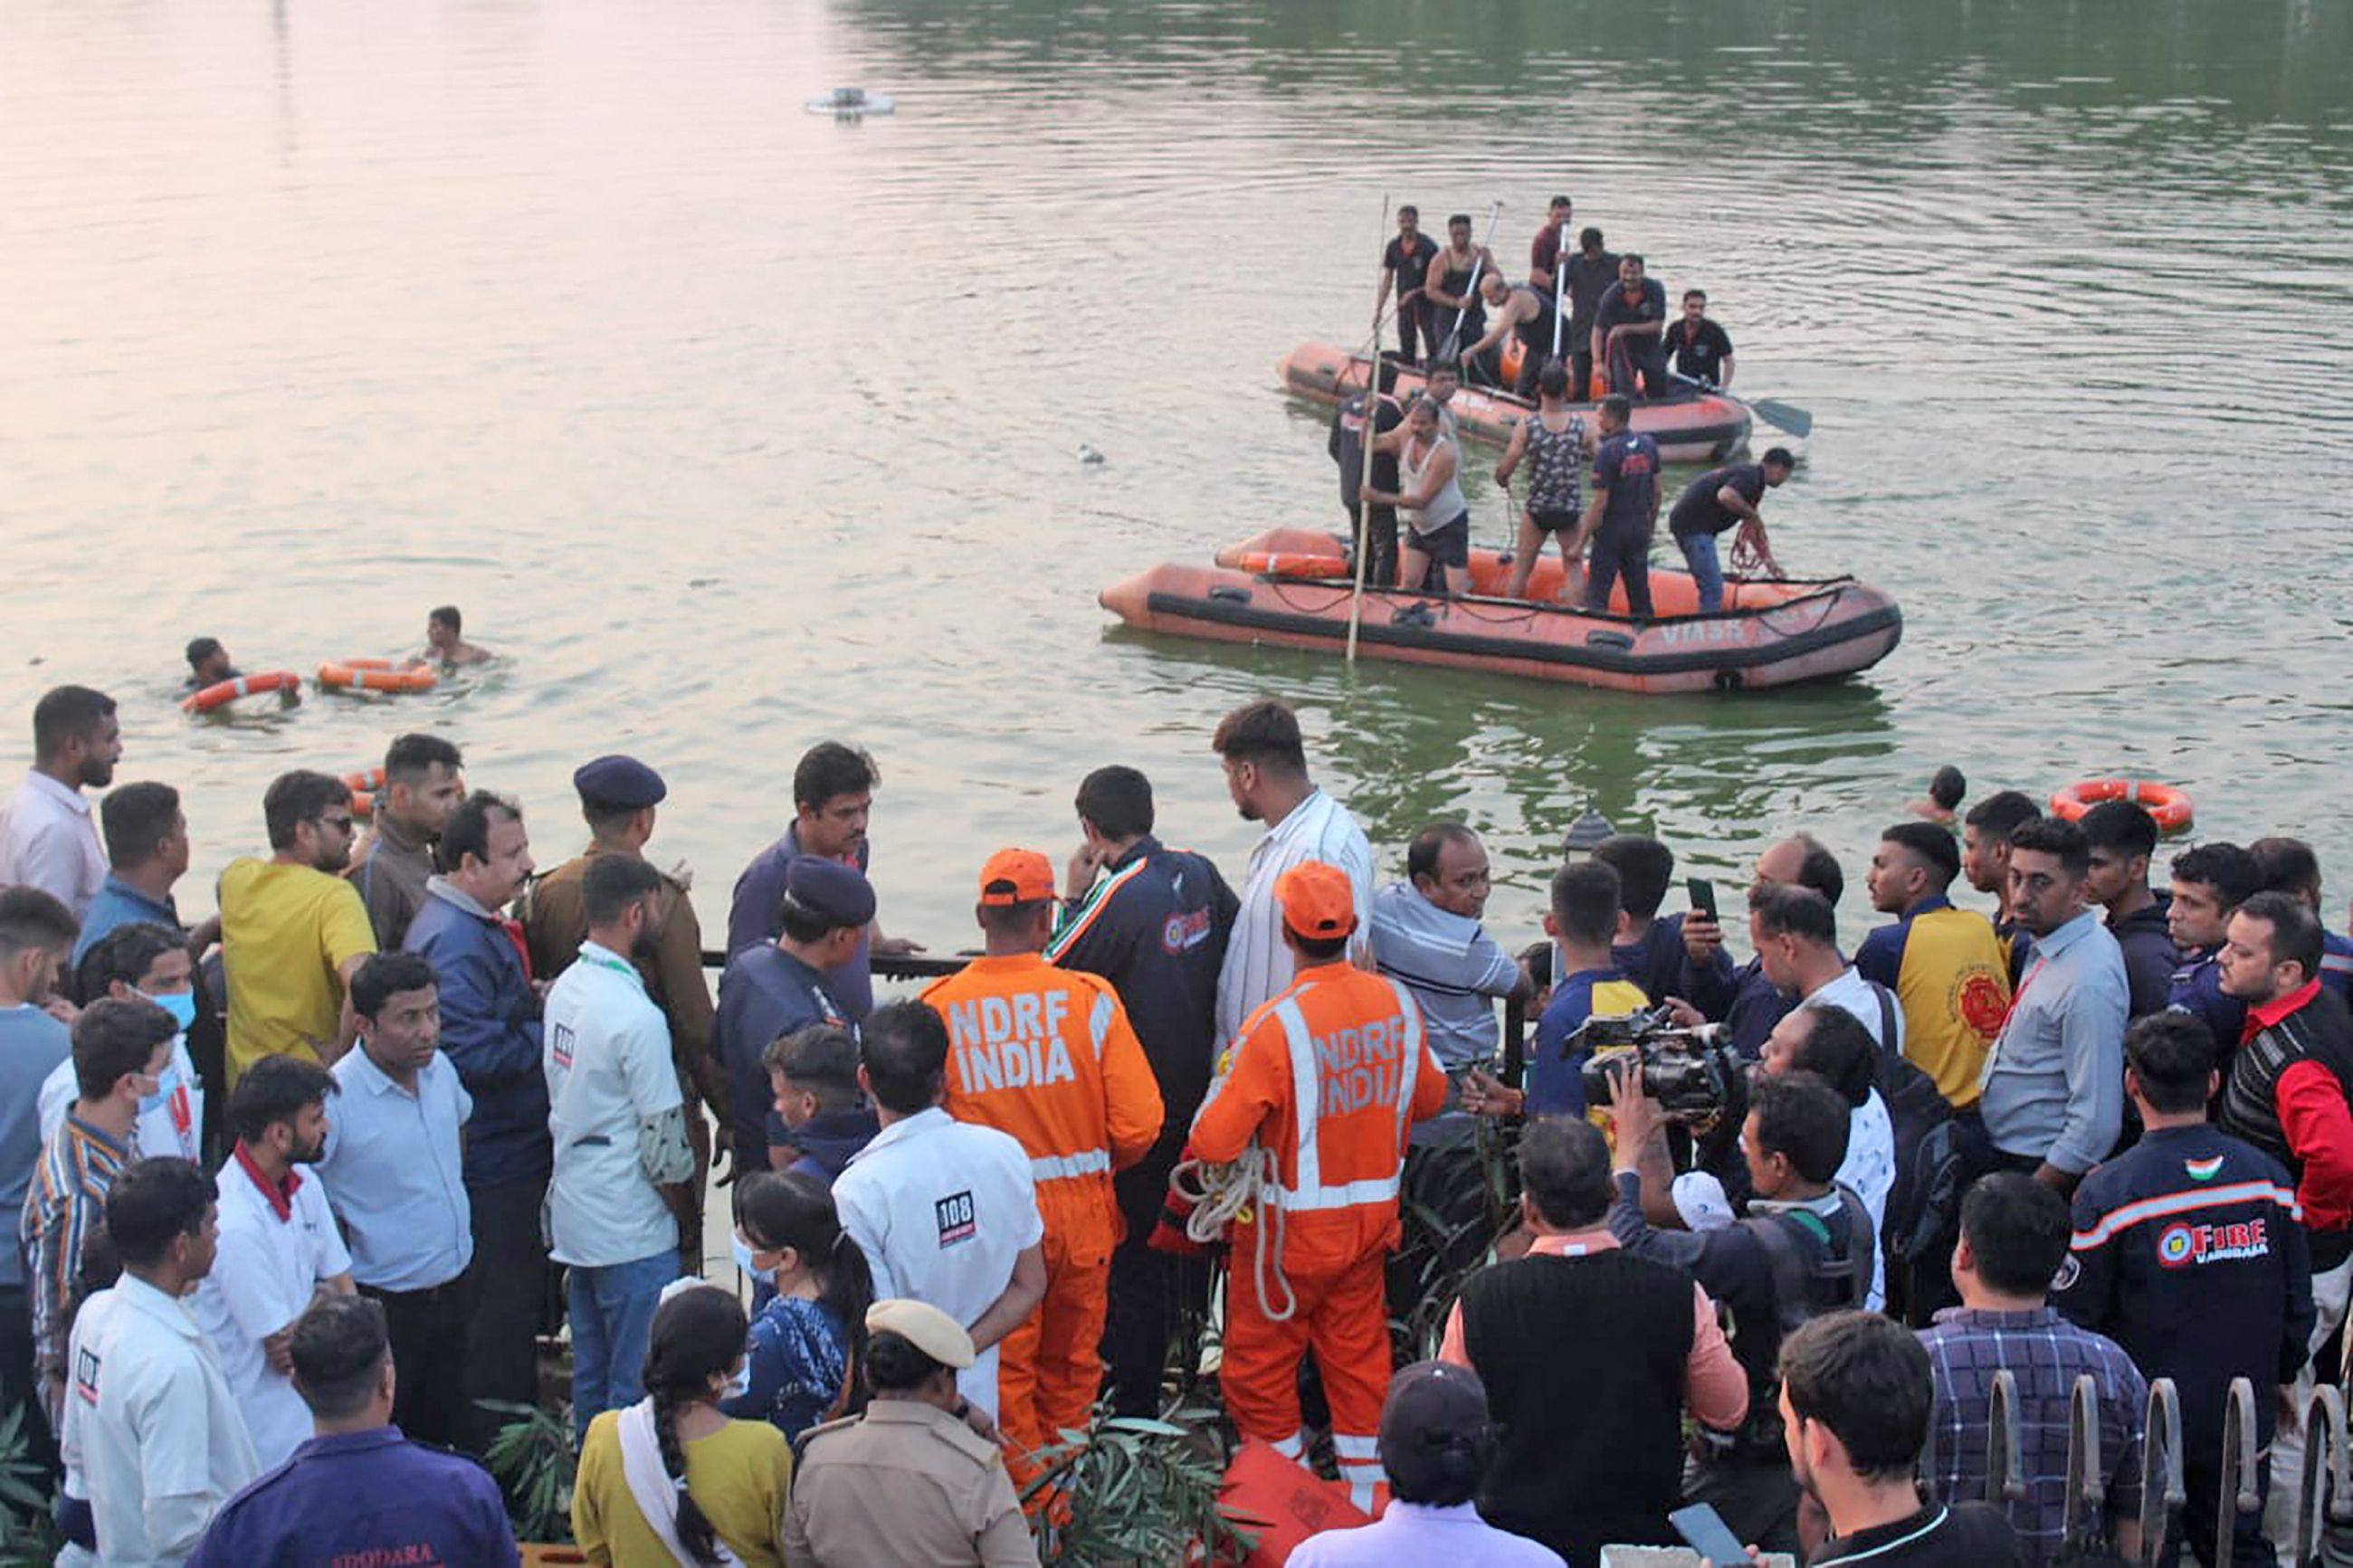 Members of Vadodara Fire and Emergency Services conduct a search and rescue mission after a boat capsized at Harni Lake in Vadodara, Gujarat, India on Thursday. Photo: AFP)